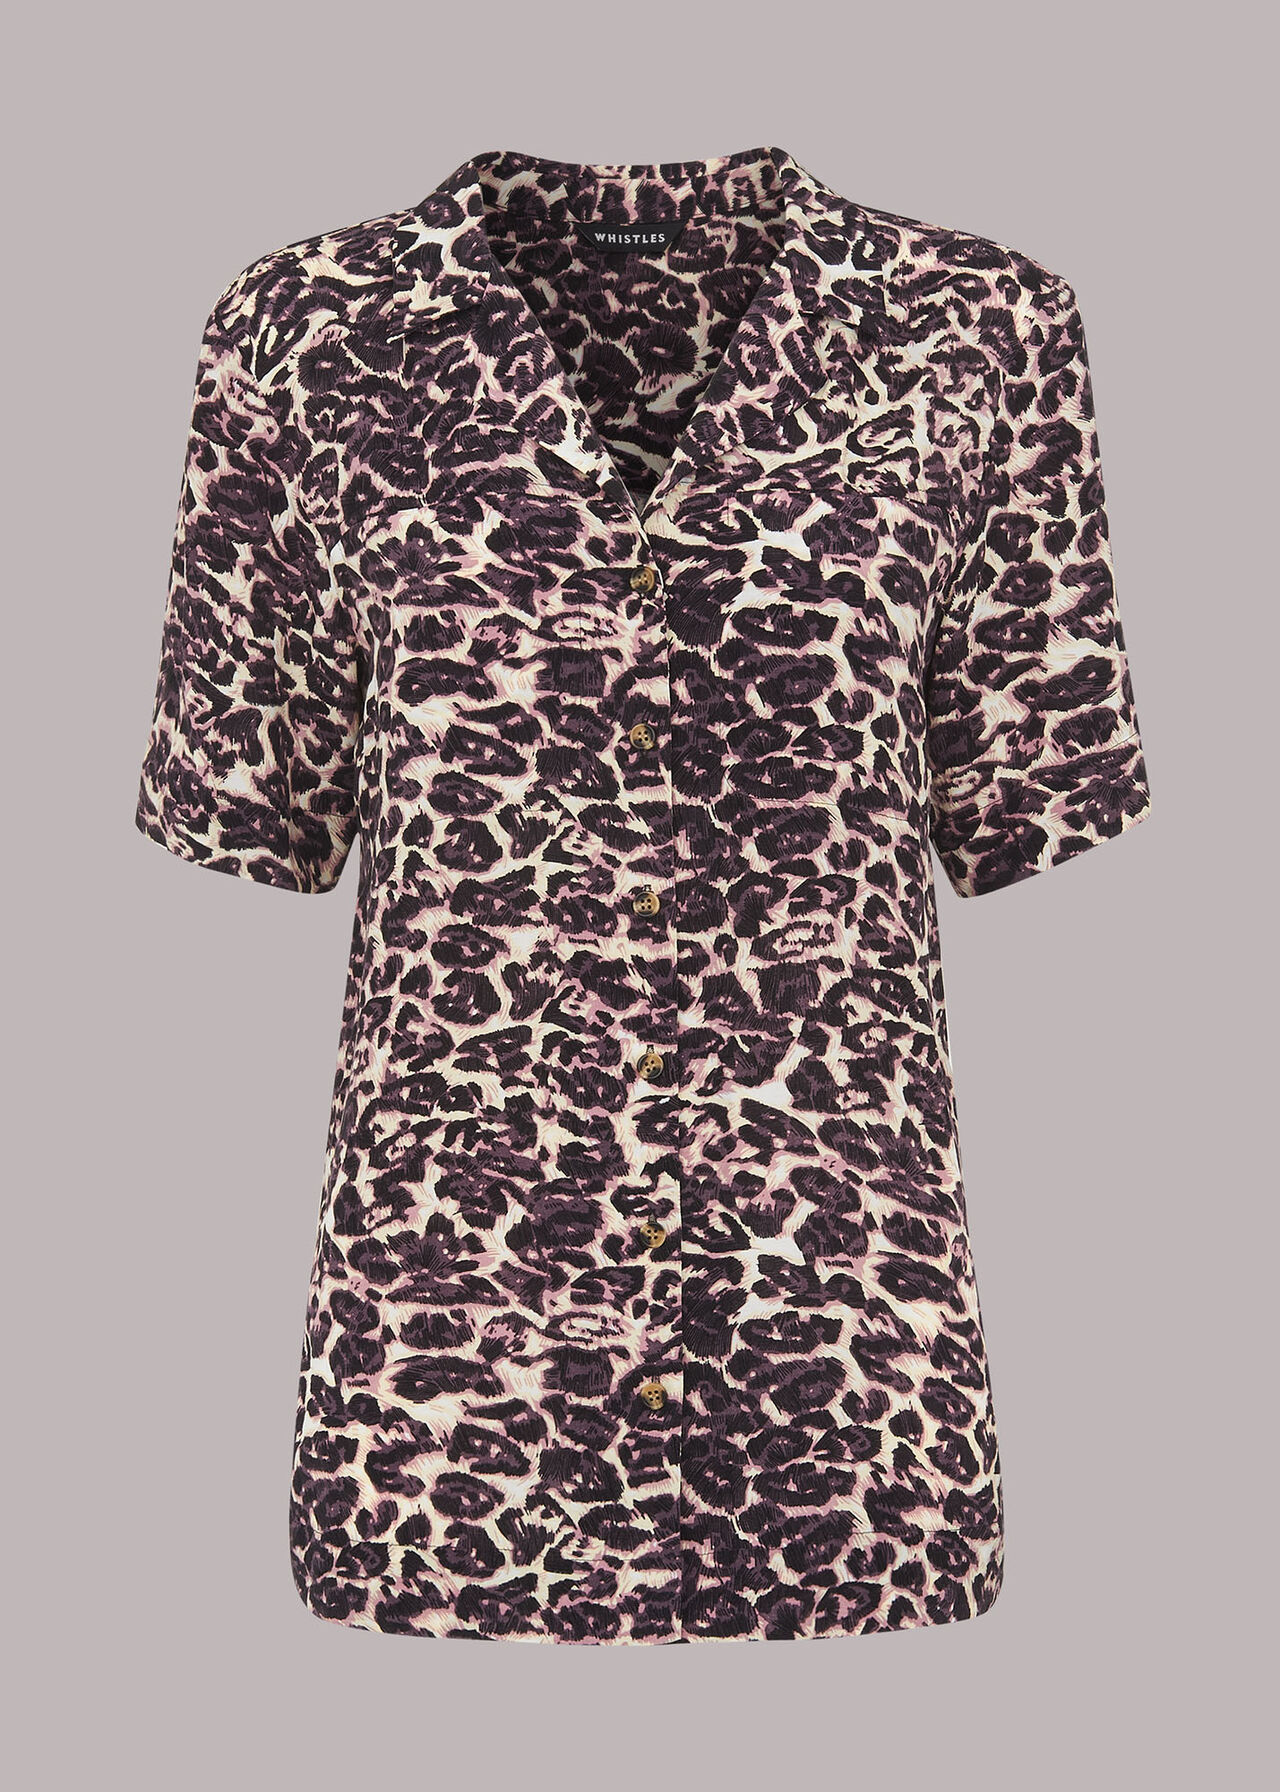 Multicolour Clouded Leopard Print Shirt | WHISTLES | Whistles